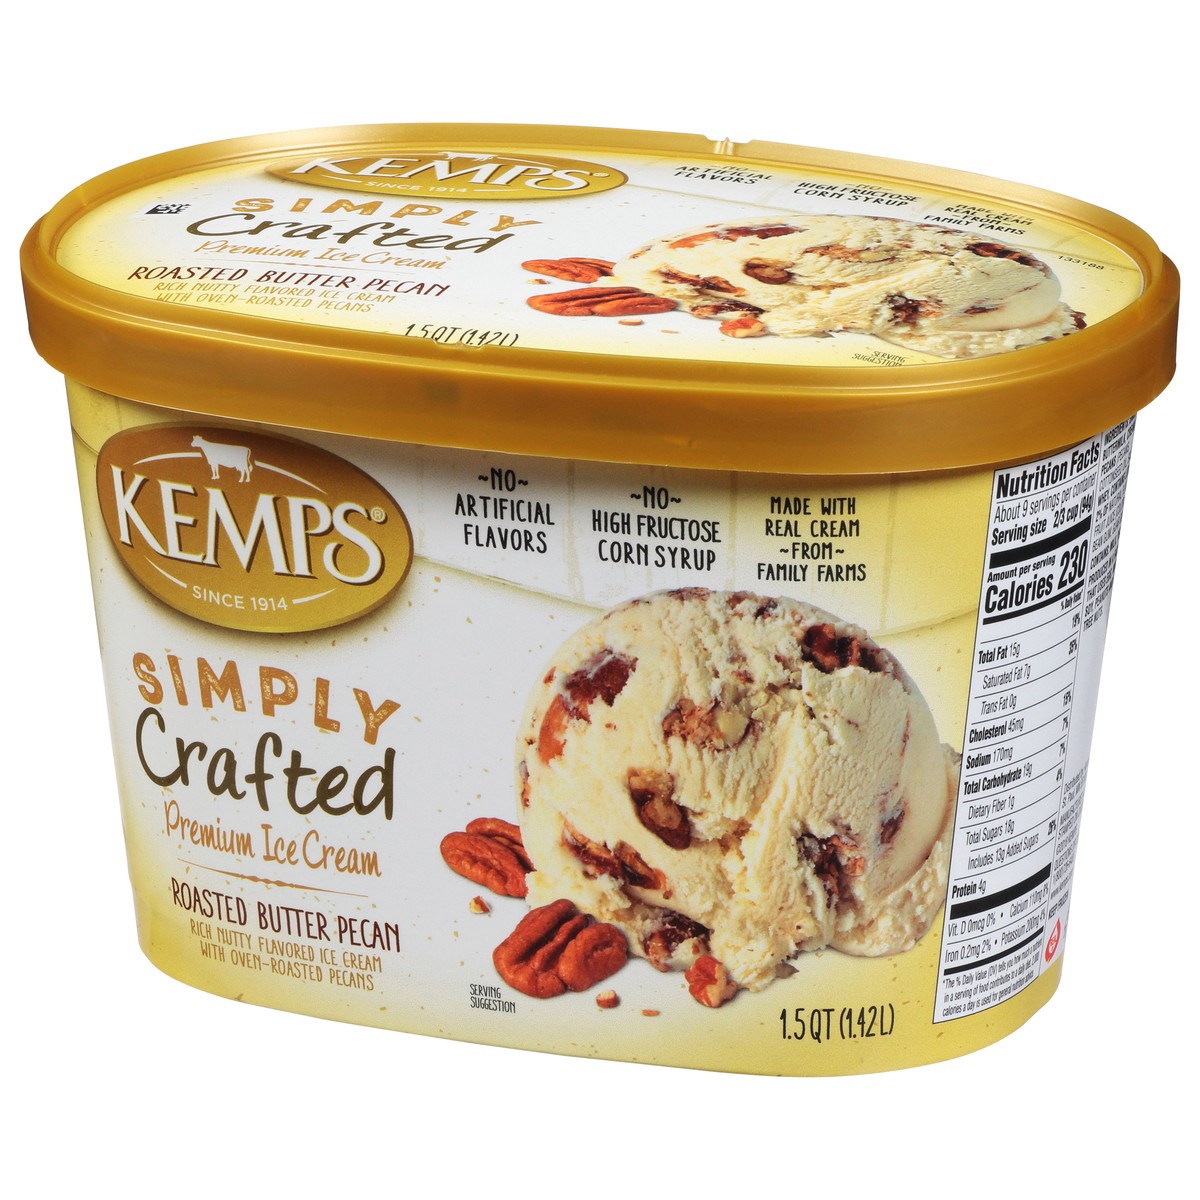 slide 8 of 13, Kemps Simply Crafted Roasted Butter Pecan Premium Ice Cream, 1.5 qt